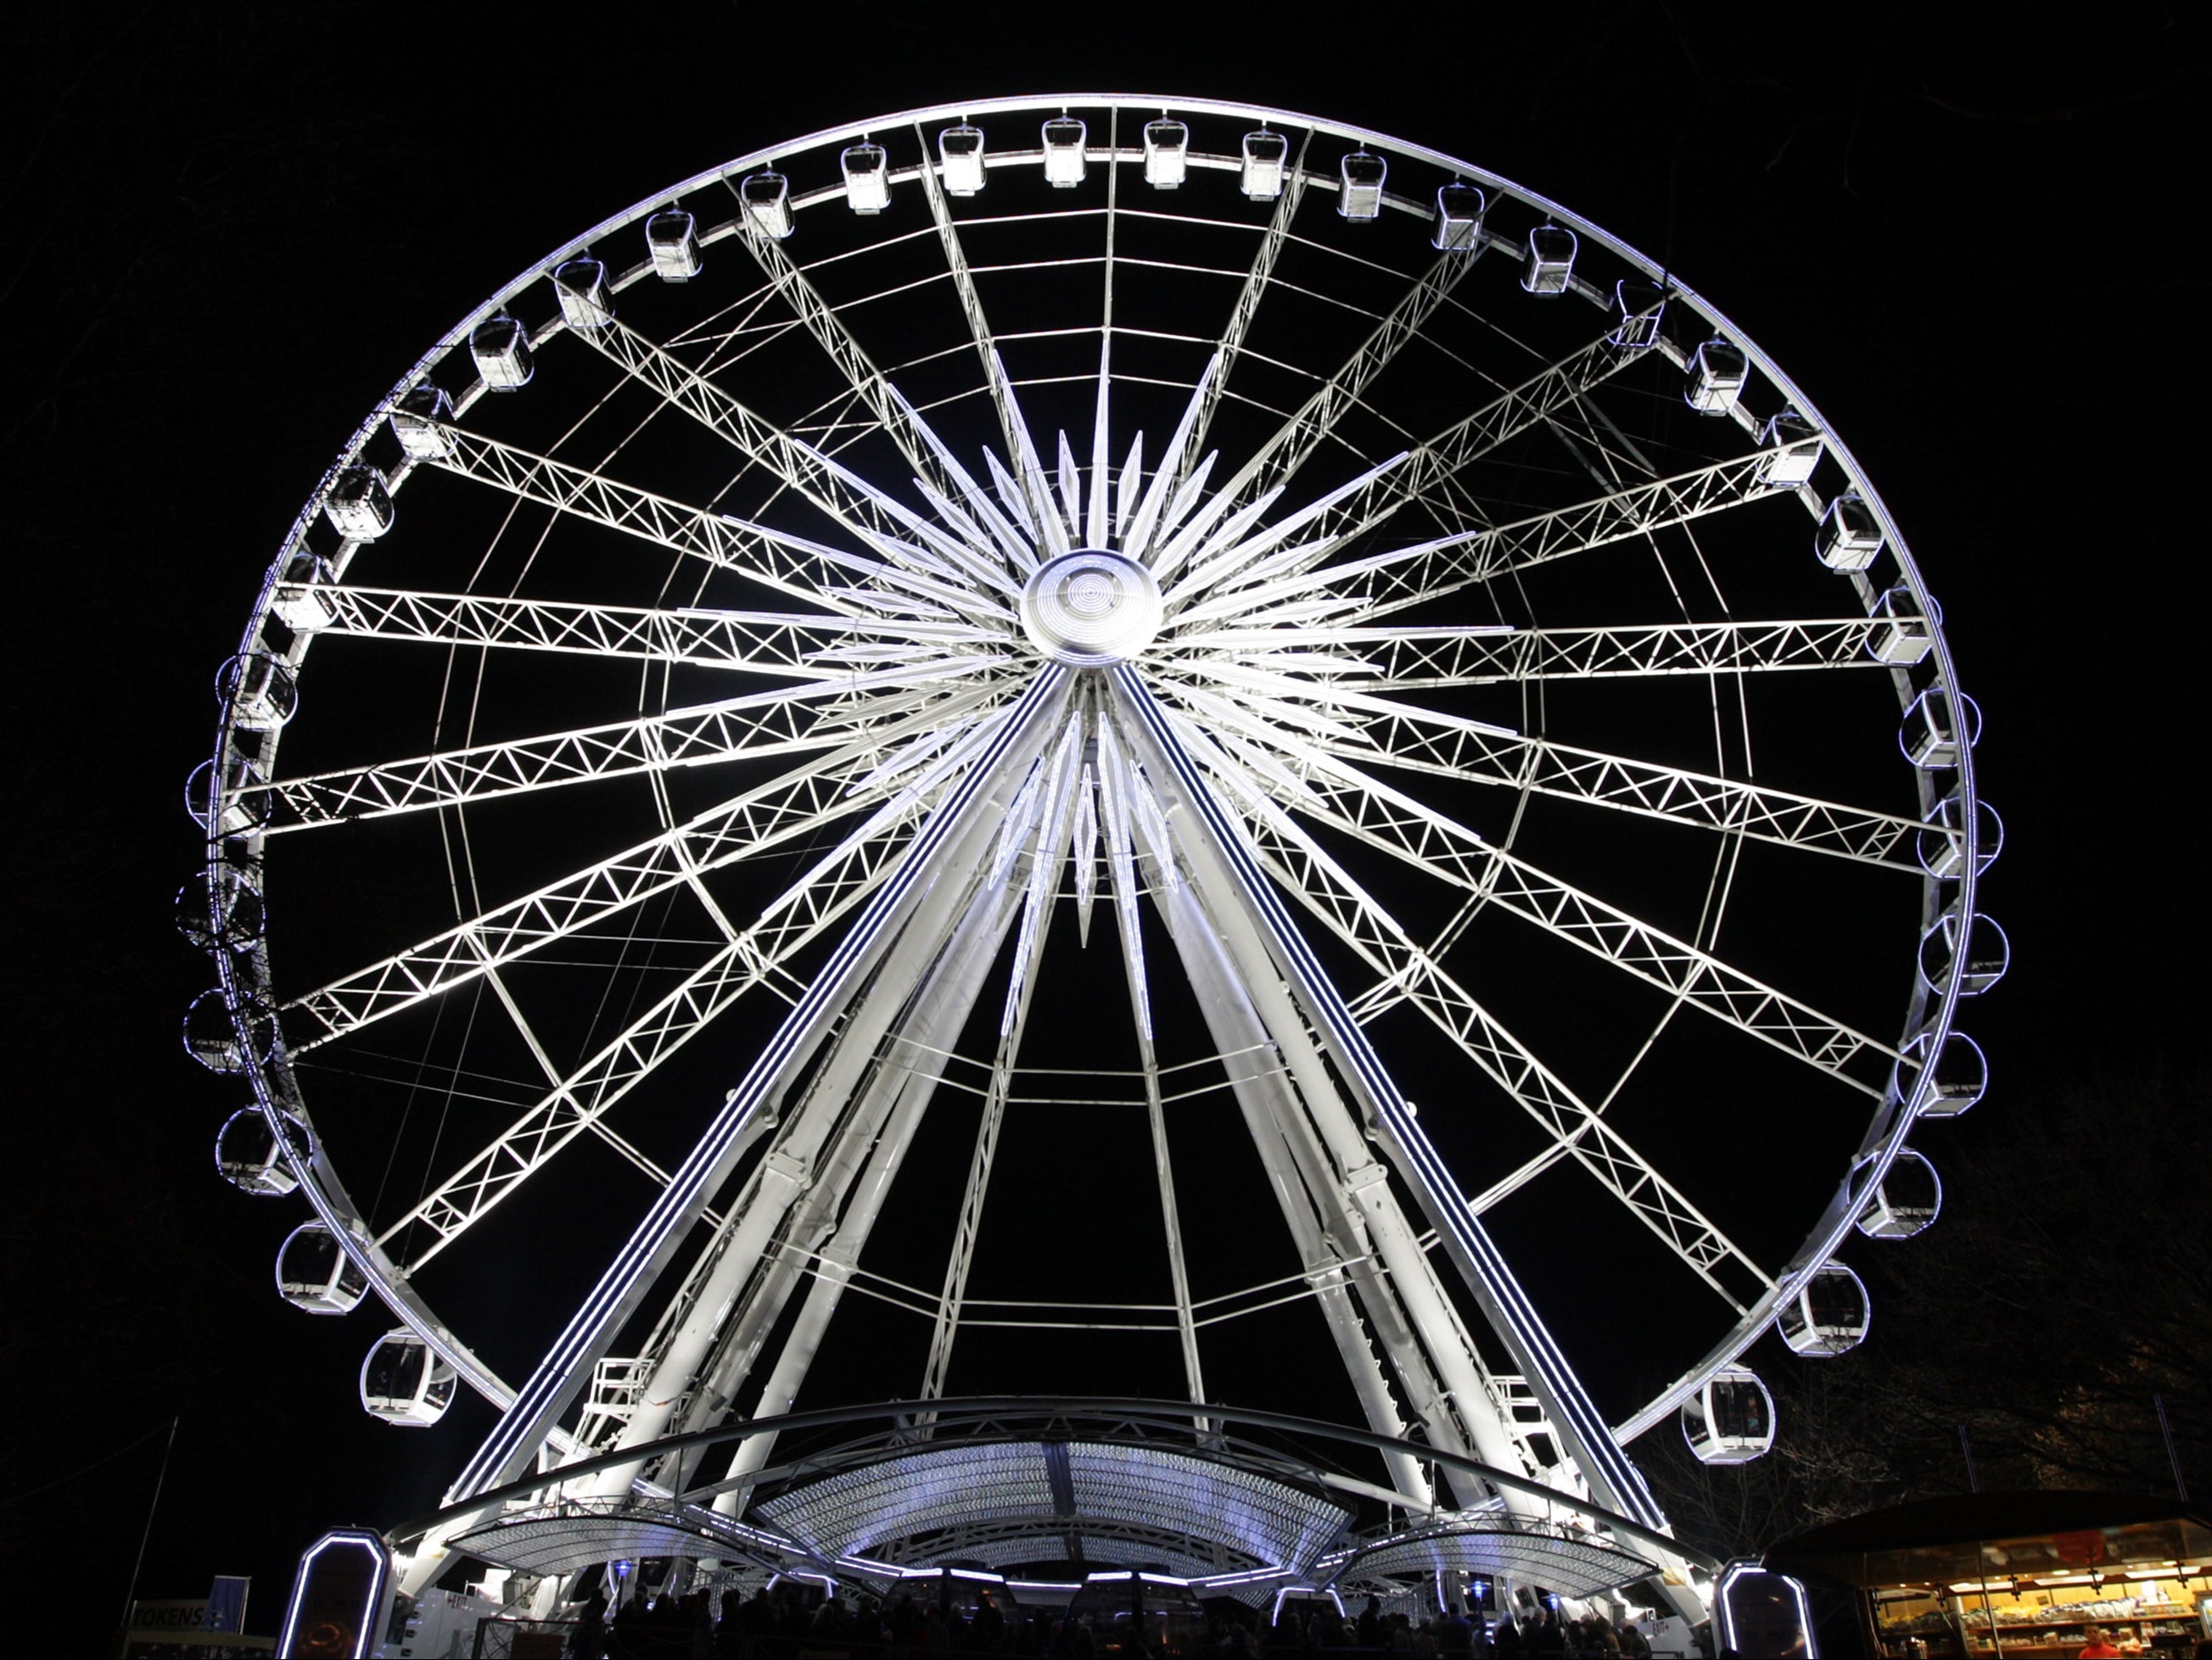 The iconic ferris wheel at Winter Wonderland in Hyde Park